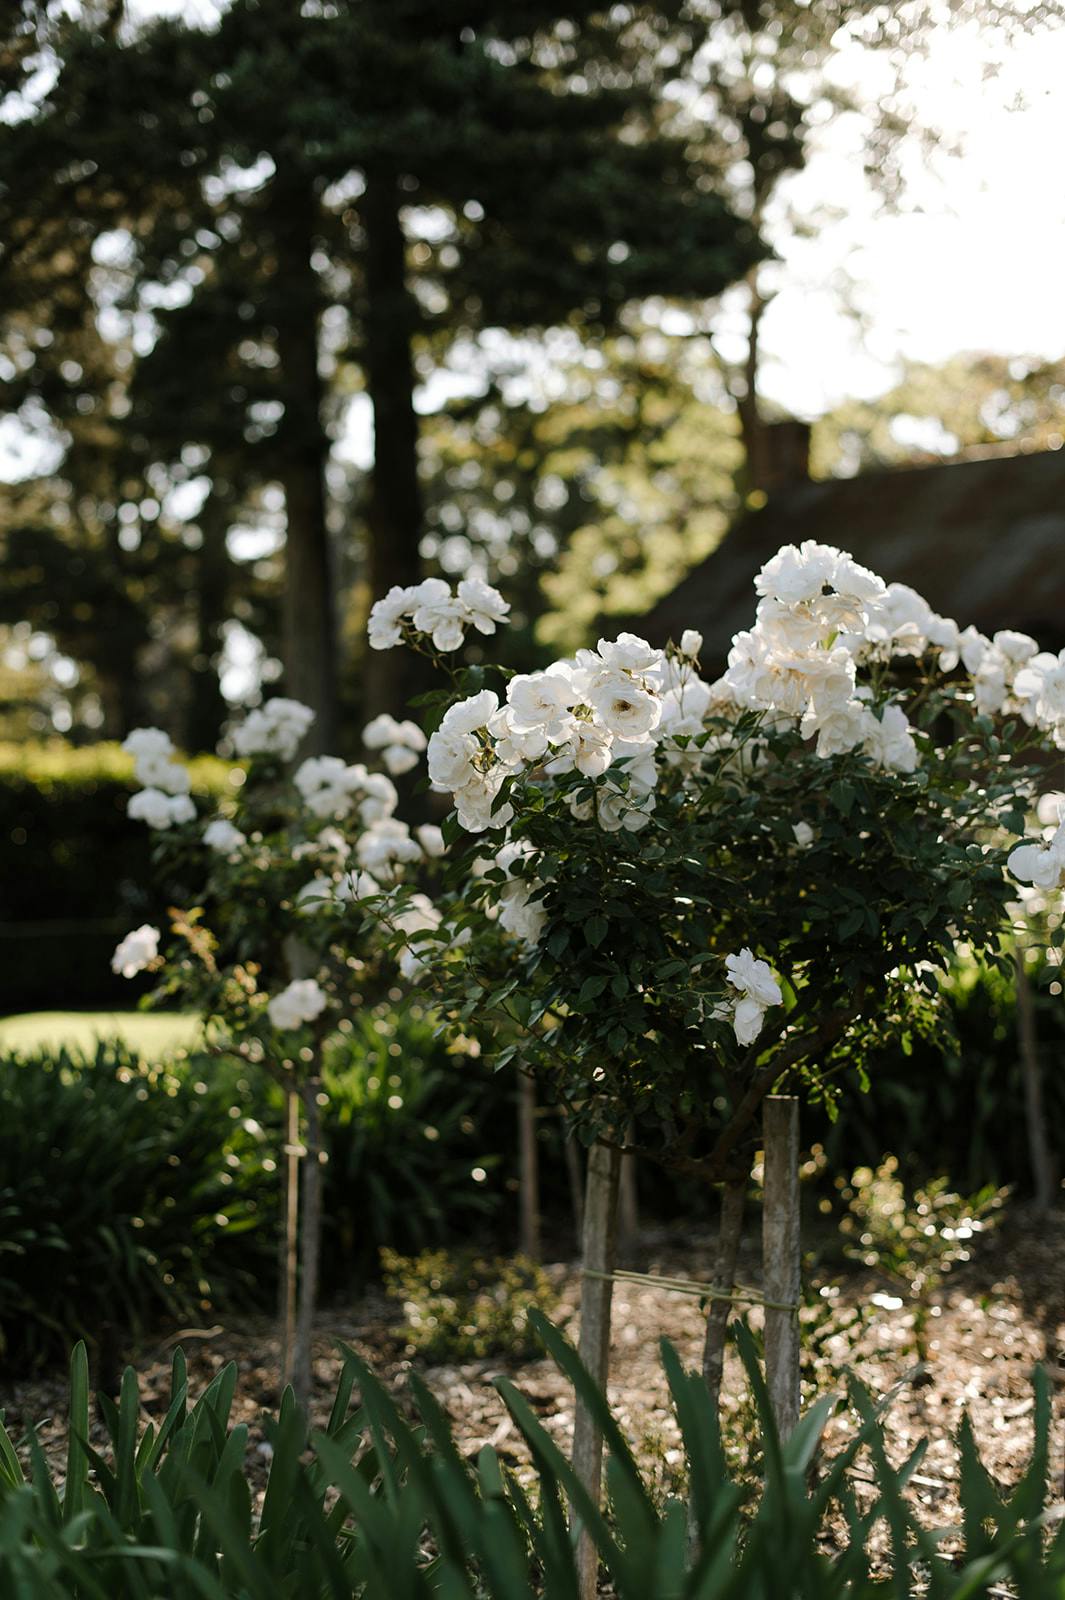 A garden scene with white flowers blooming on tall bushes under the soft sunlight. The background features tall trees and blurred greenery. The overall atmosphere of the image is serene and natural.